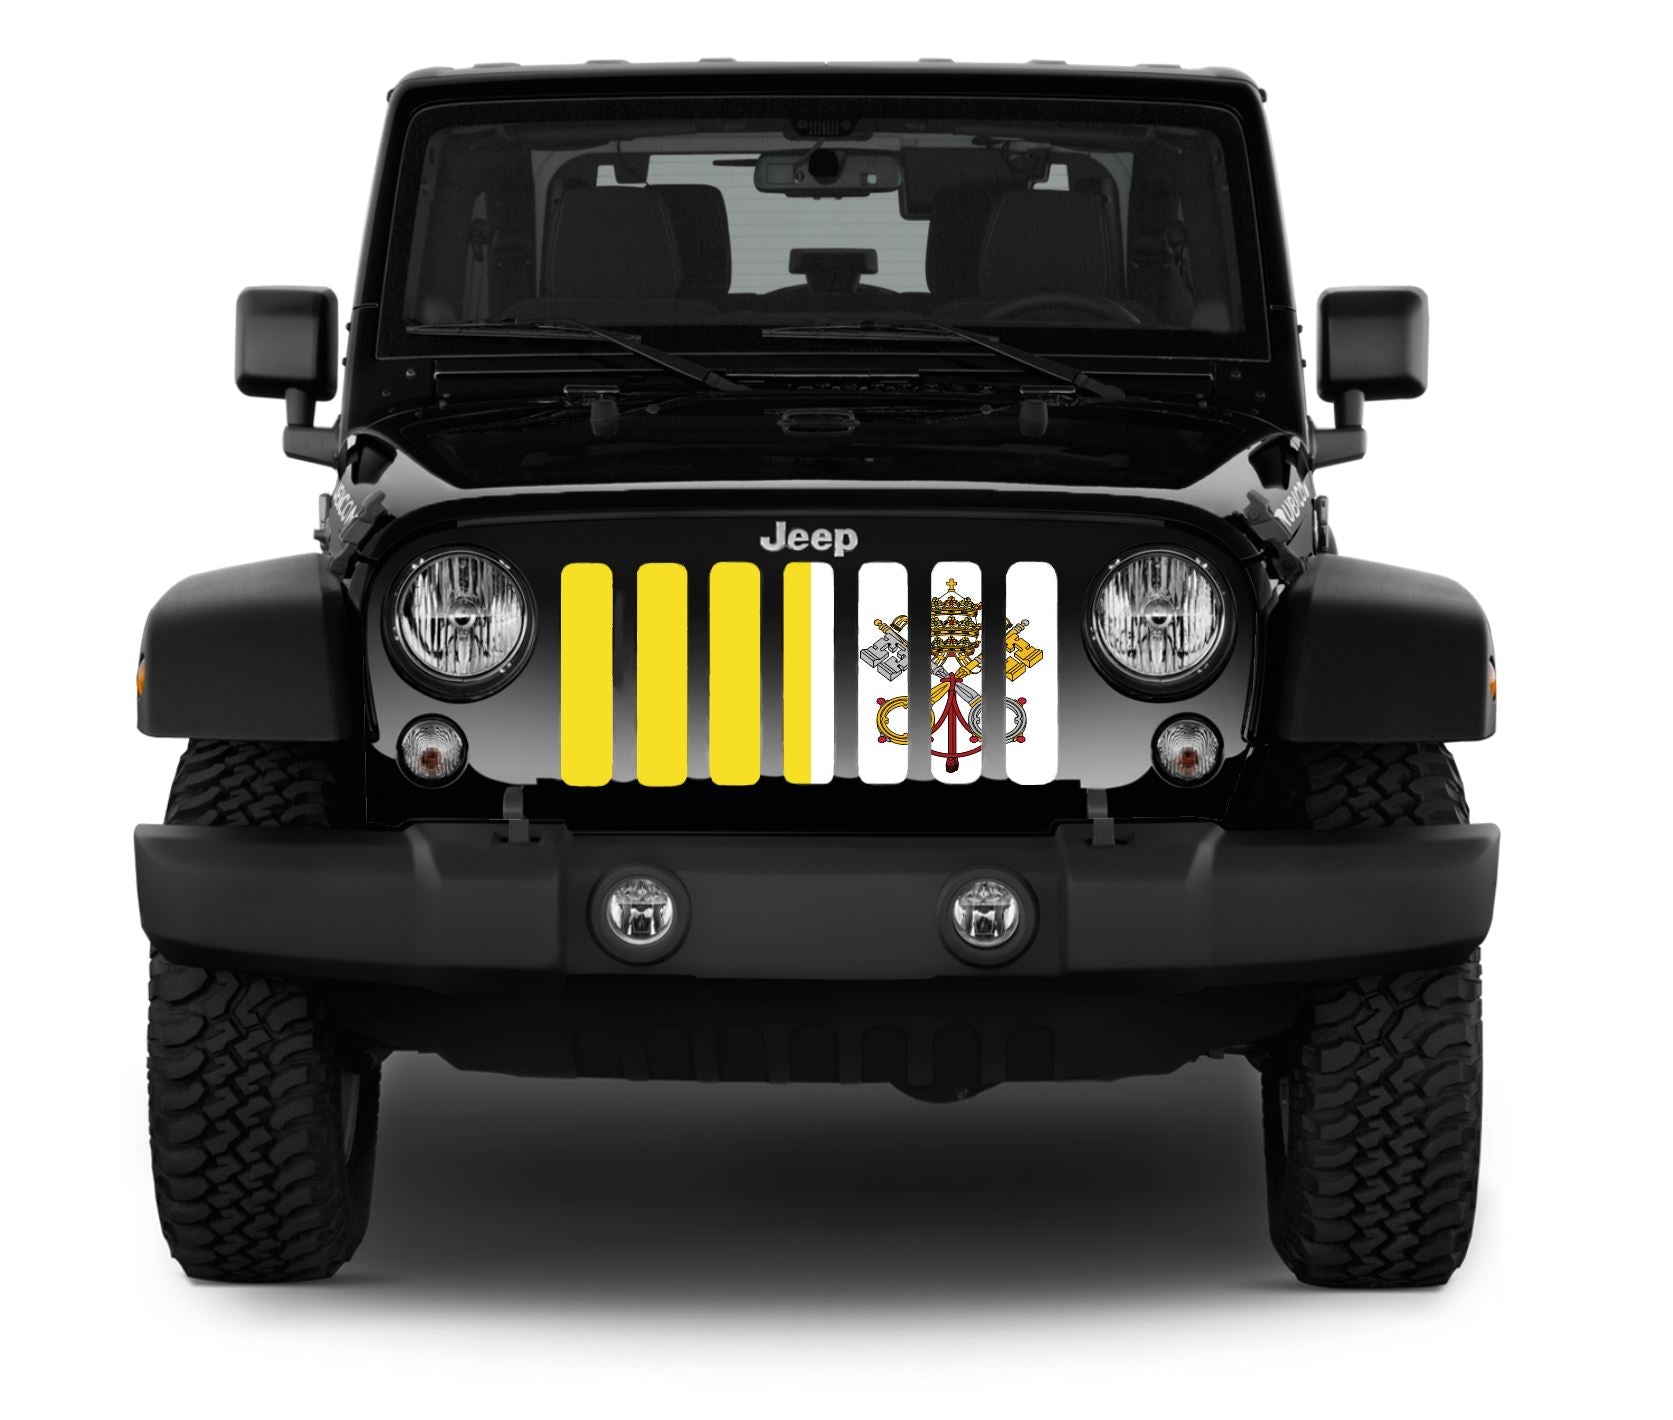 Jeep Wrangler Vatican City Grille Insert | Dirty Acres – Jeep World